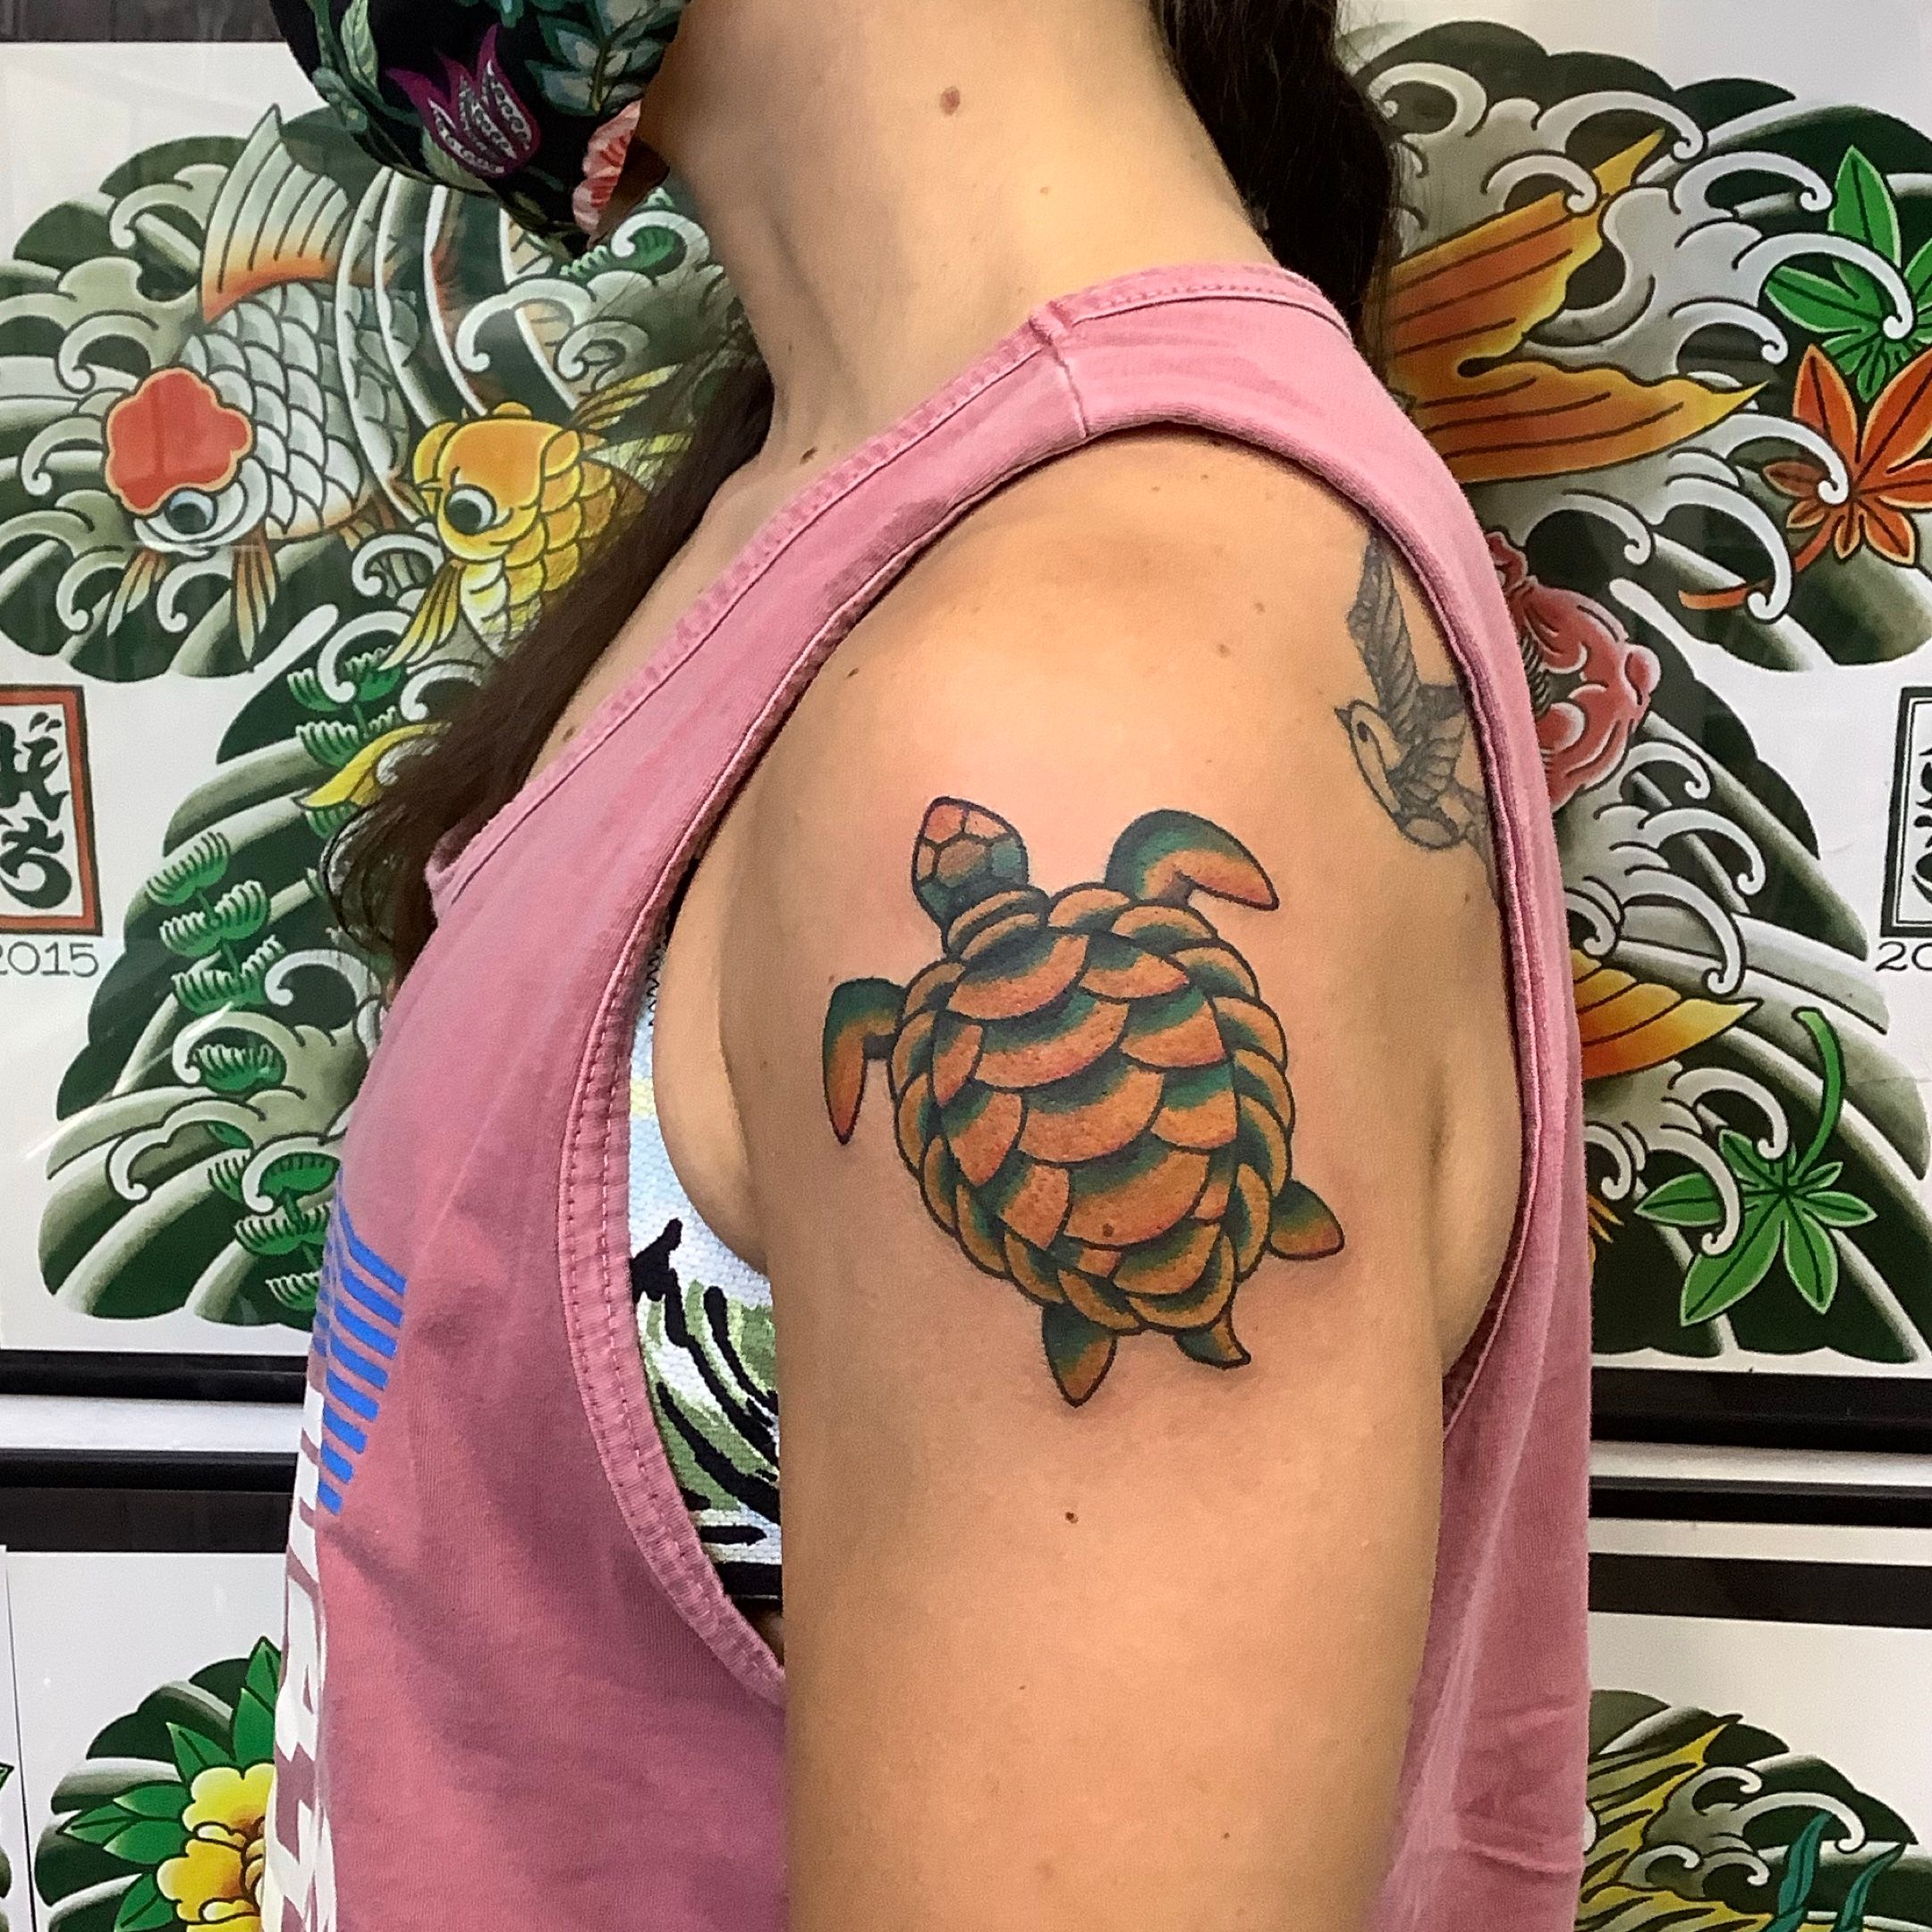 Steel Heart Tattoo Reloaded  A more traditional style Shellback tattoo   Facebook